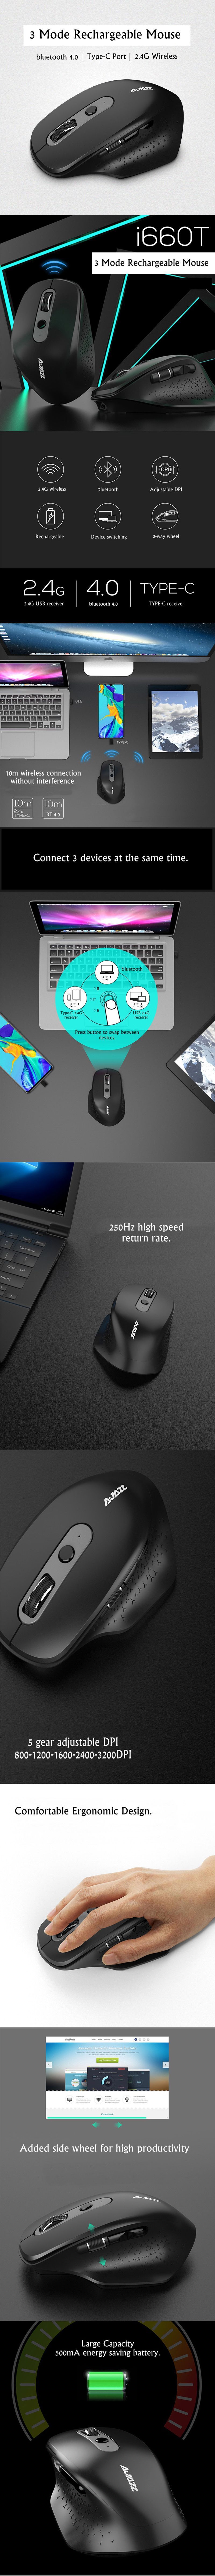 Ajazz-I660T-bluetooth-40-24G-Wireless-24G-Type---C-Port-Wired-Three-Mode-3200DPI-Portable-Mouse-1554528